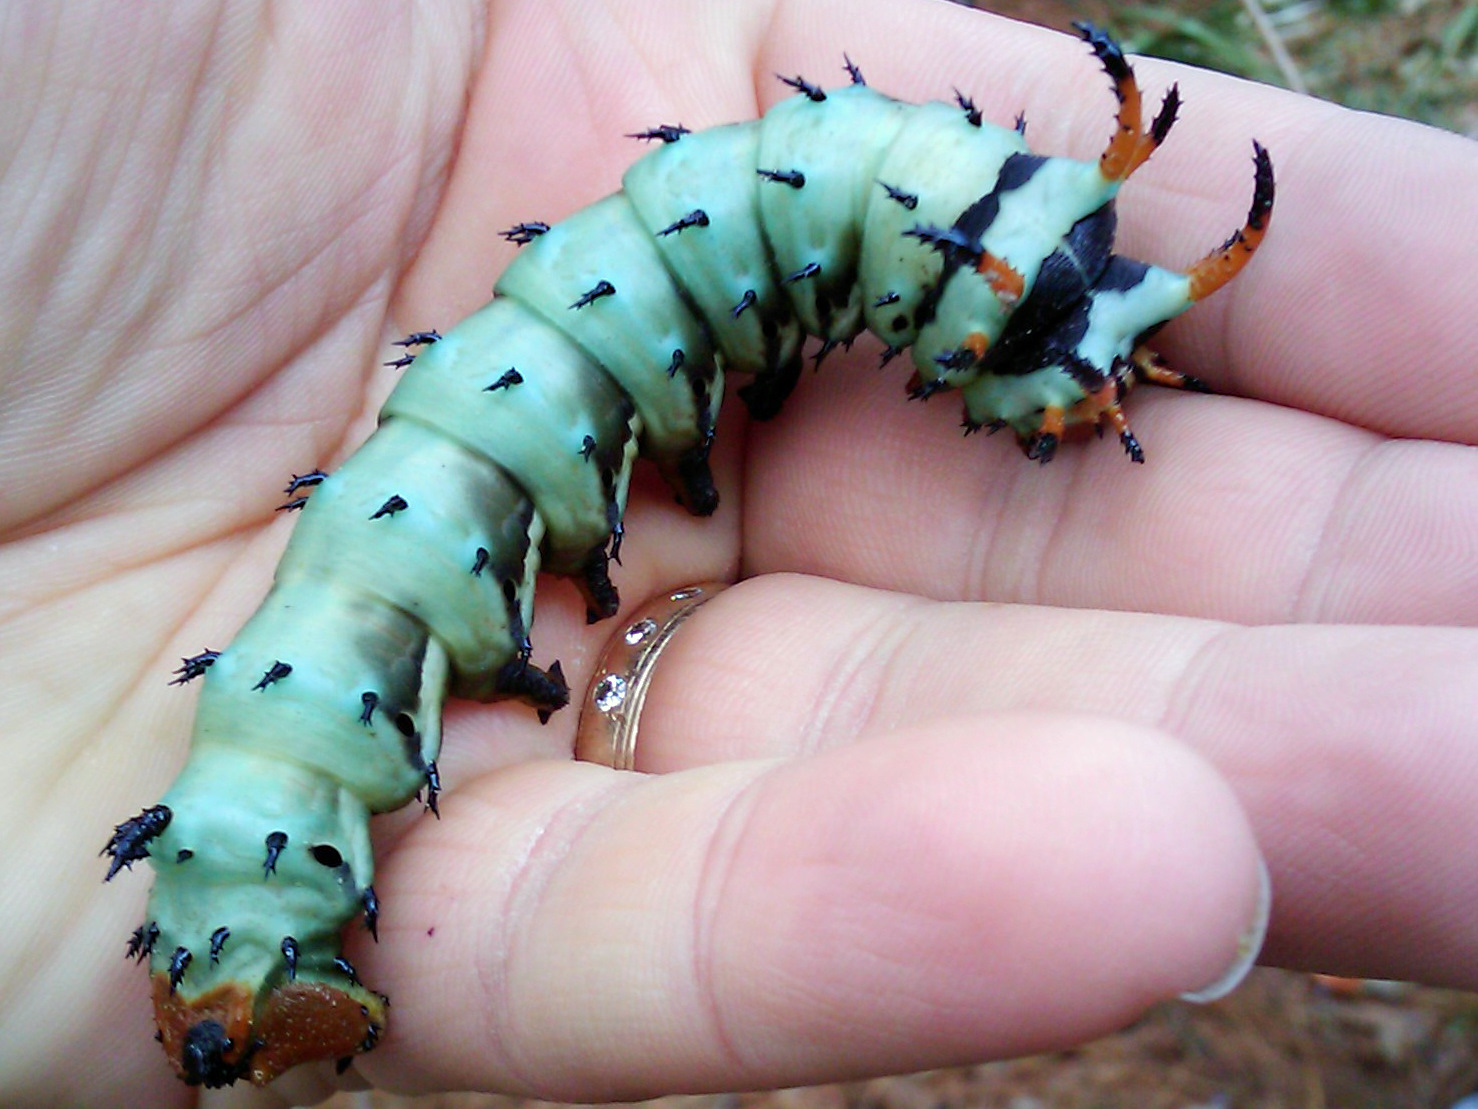 The Hickory Horned Devil, the larval form of the Royal Walnut Moth, can grow to nearly 6 inches long and is harmless despite its fearsome appearance.